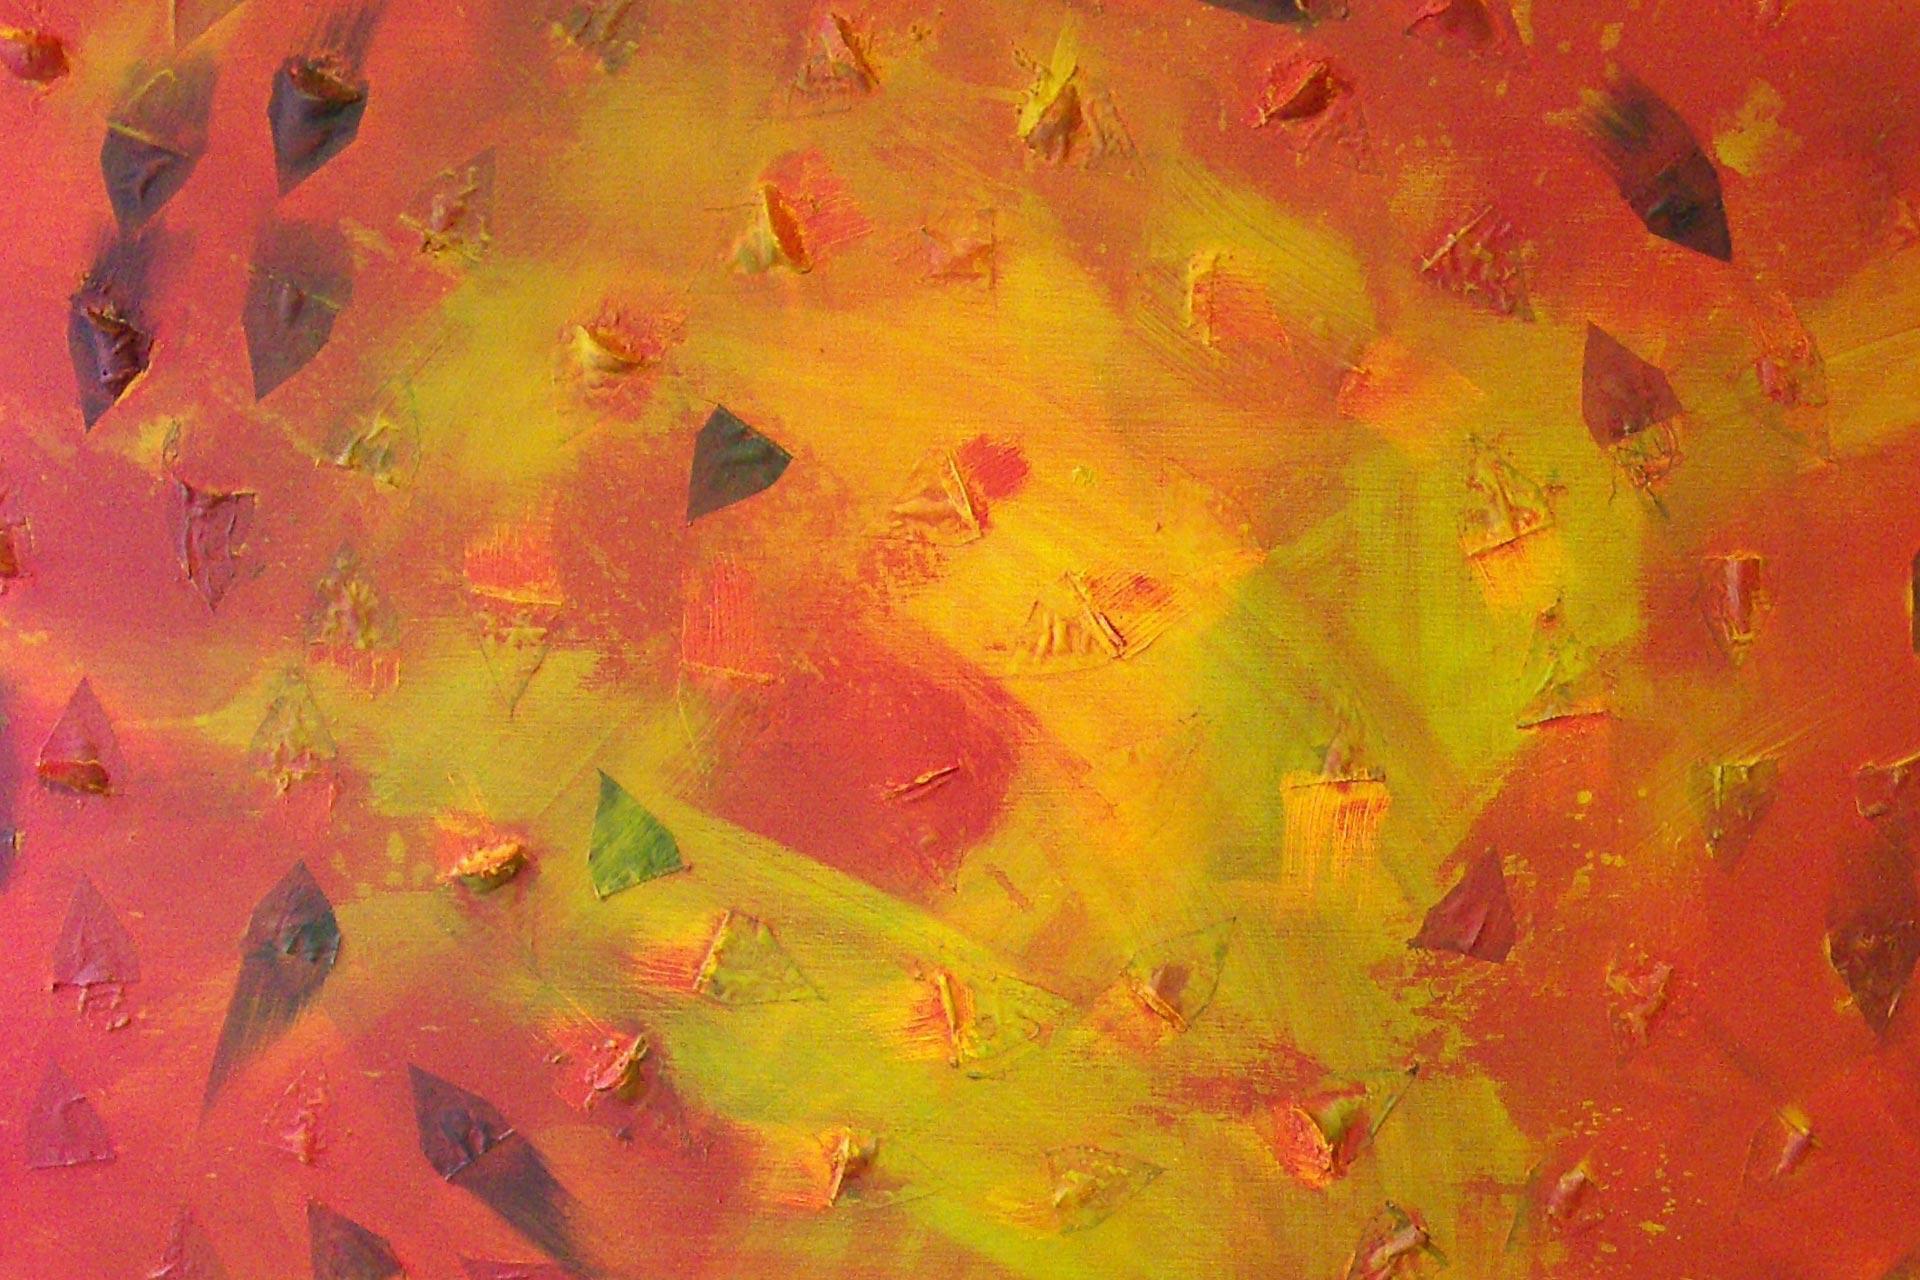 Brighart is a Dutch painter of abstract art: Title of this powerful yellow/red/orange artwork is Individuals